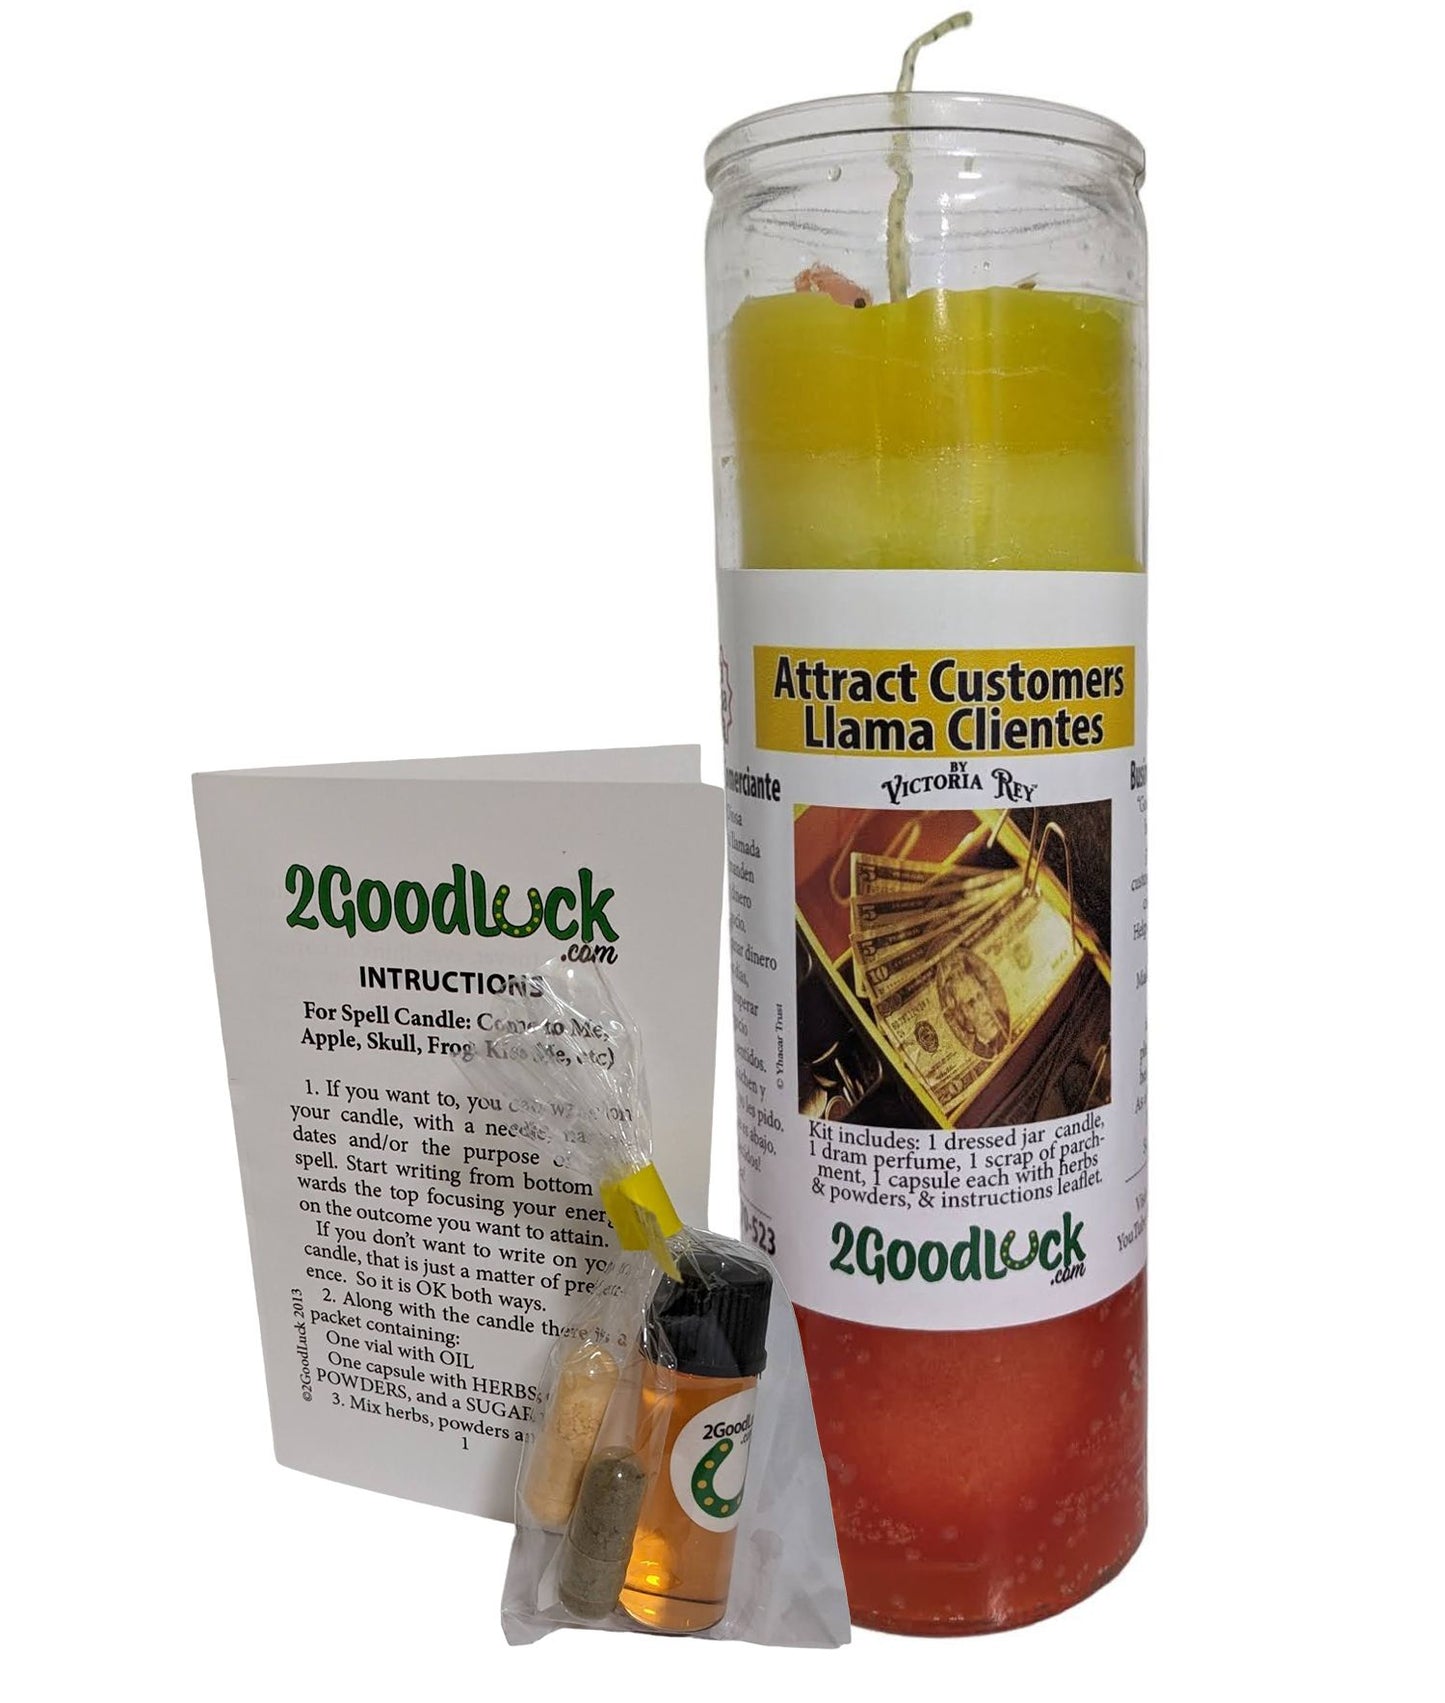 Attract Customers Dressed Candle Kit - Llama Clientes